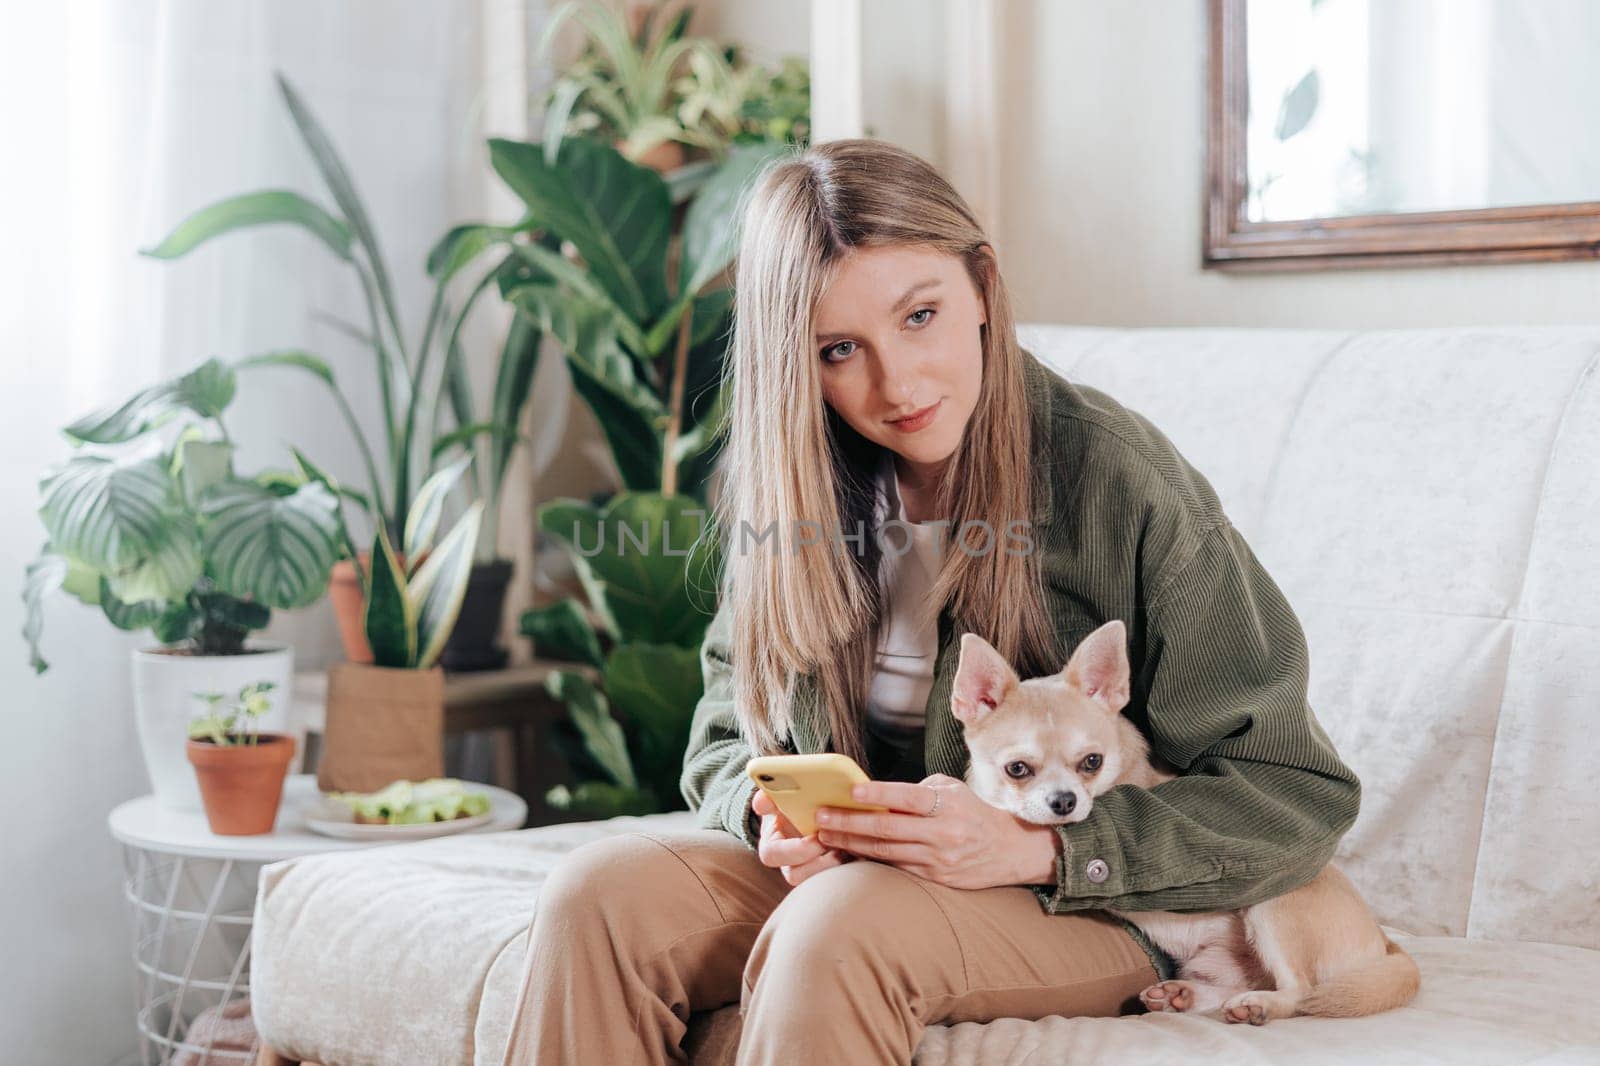 Freelance woman with mobile phone and dog, and working from home office. Happy girl sitting on couch in living room with plants. Distance learning and online education by Ostanina